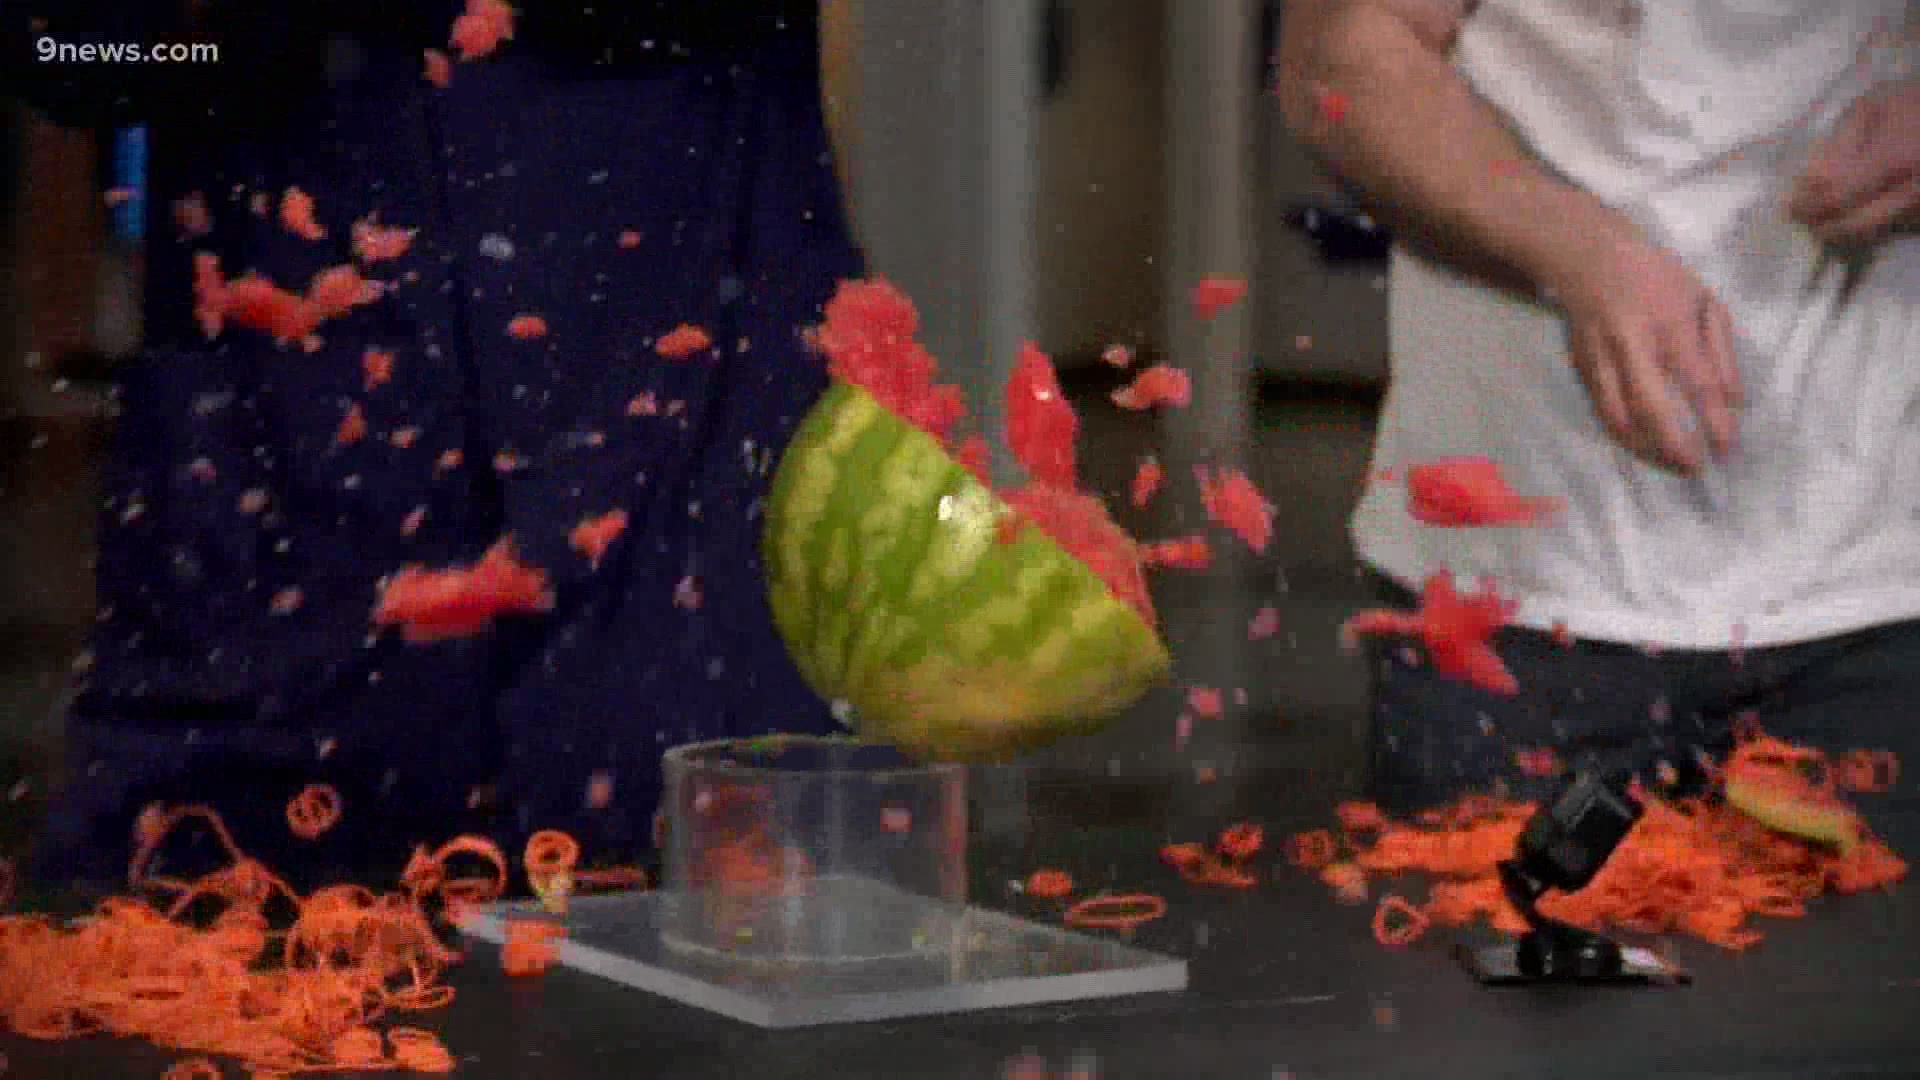 Science guy Steve Spangler shows us how rubber bands can be used to creatively cut a watermelon if you're also ready for a big mess.